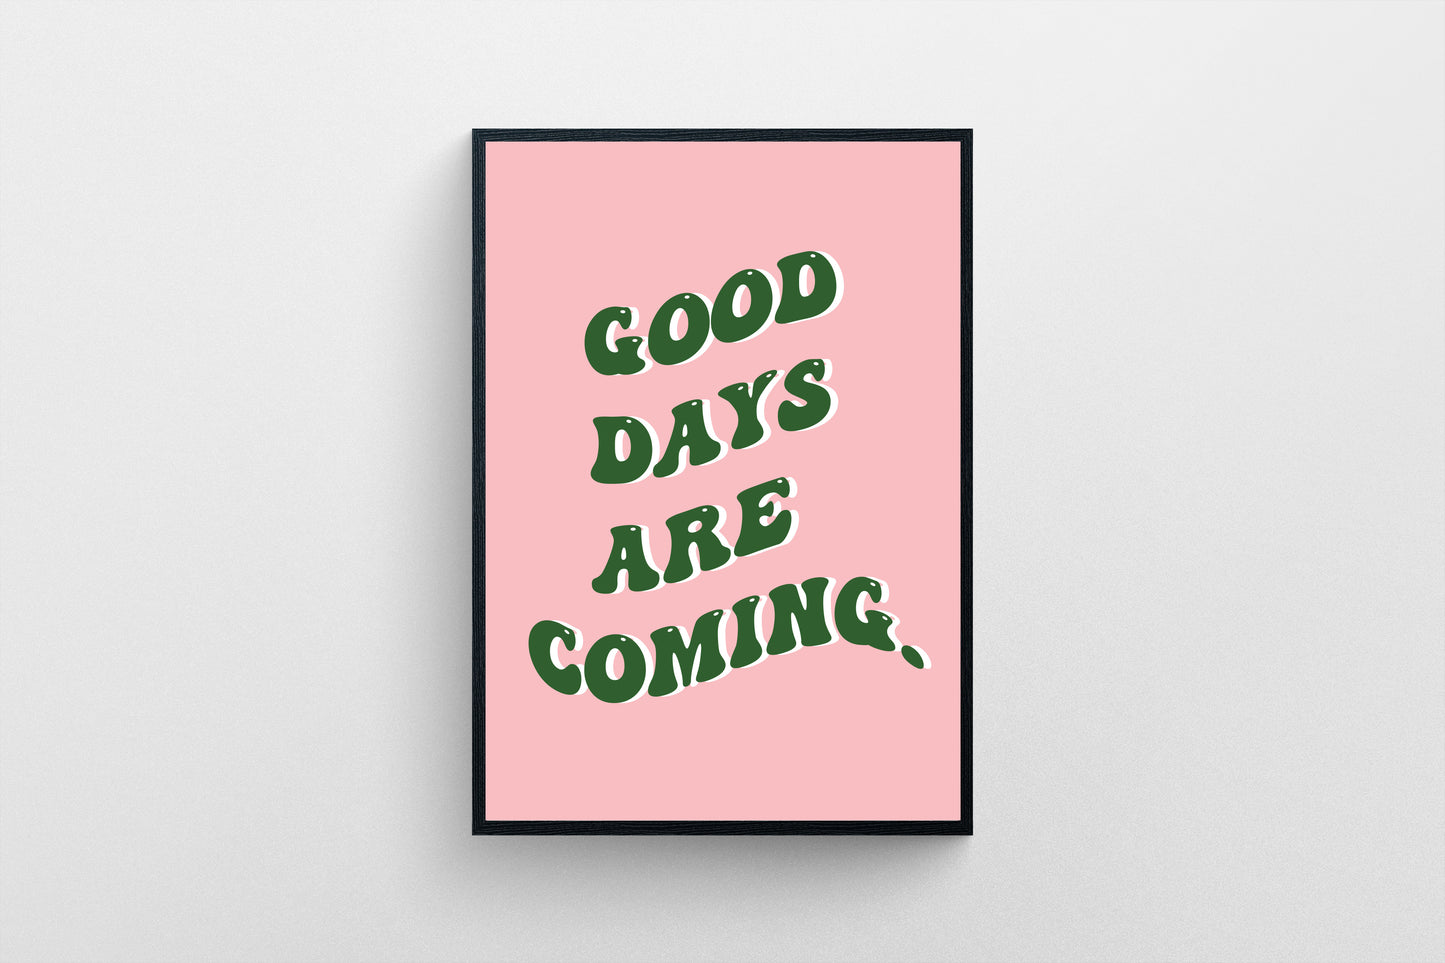 Good days are coming - Print